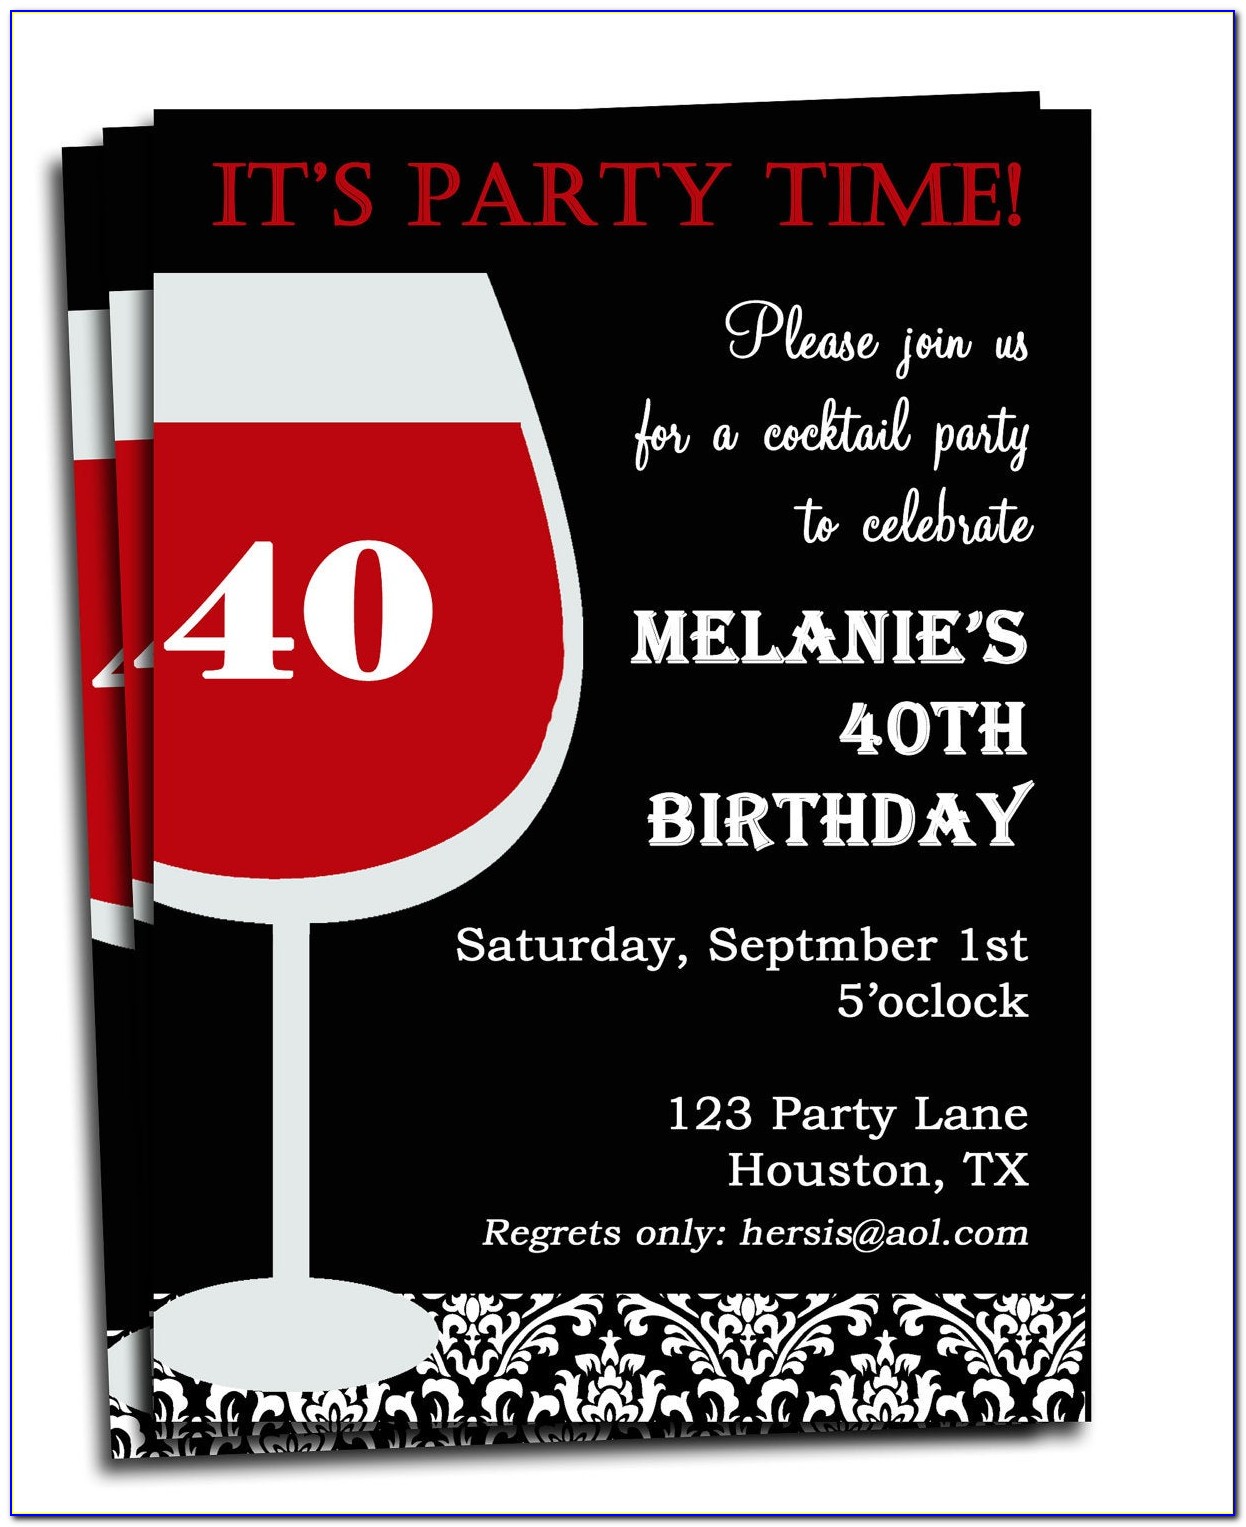 Free Printable Birthday Party Invitations For Adults